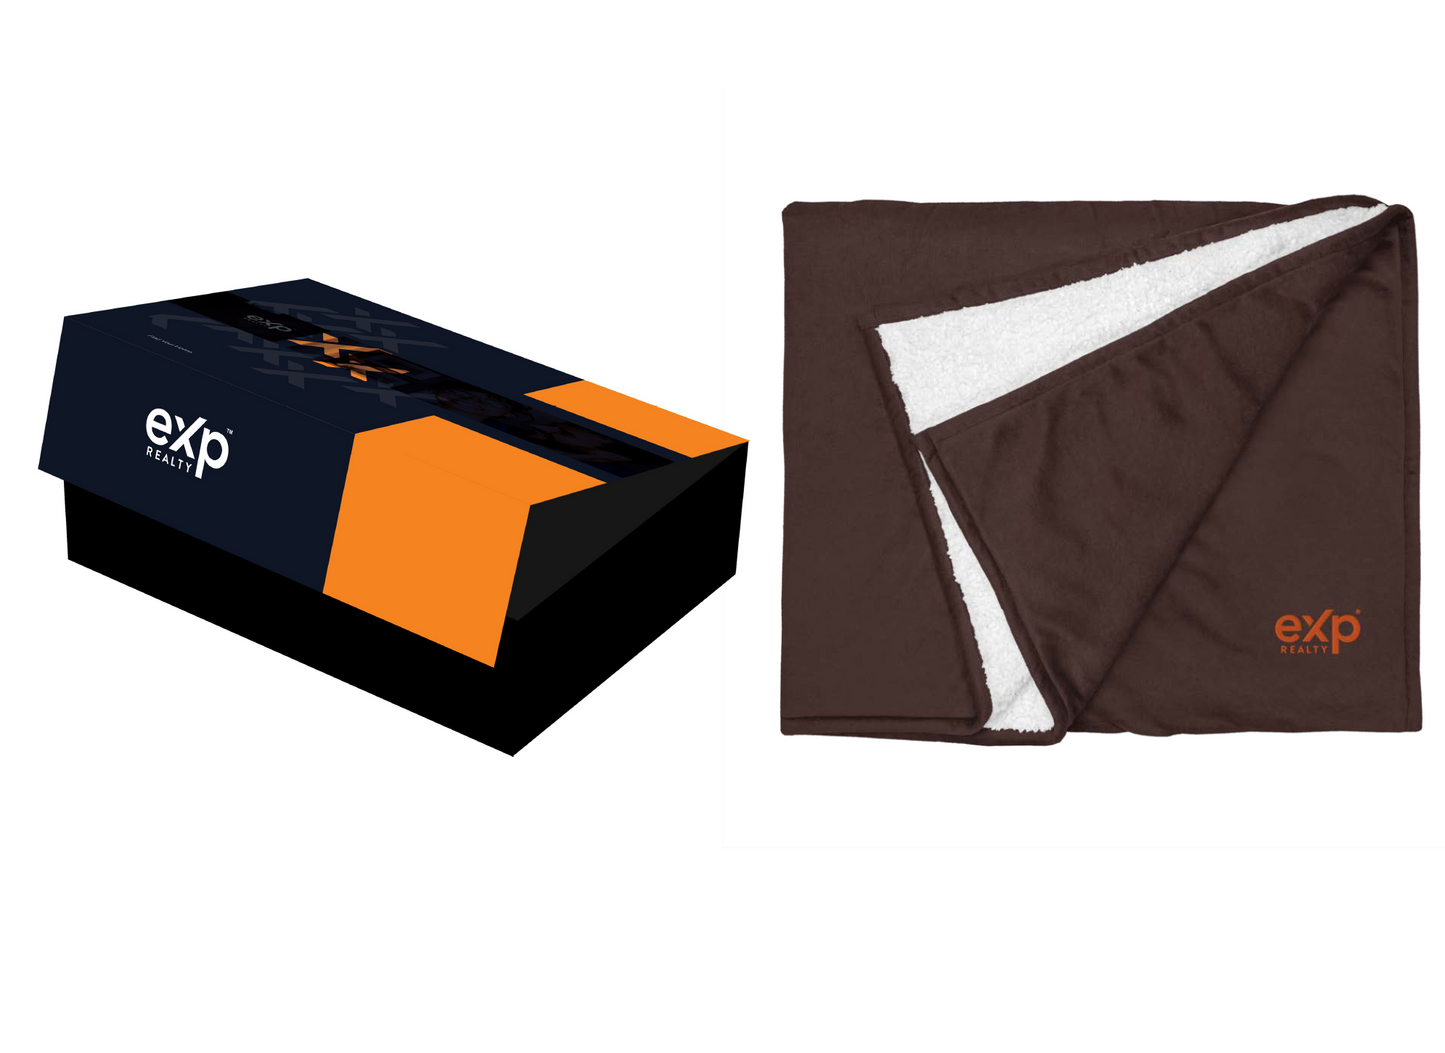 eXp Branded Closing Gift Box with eXp Branded Blanket (from $$91 per complete box)